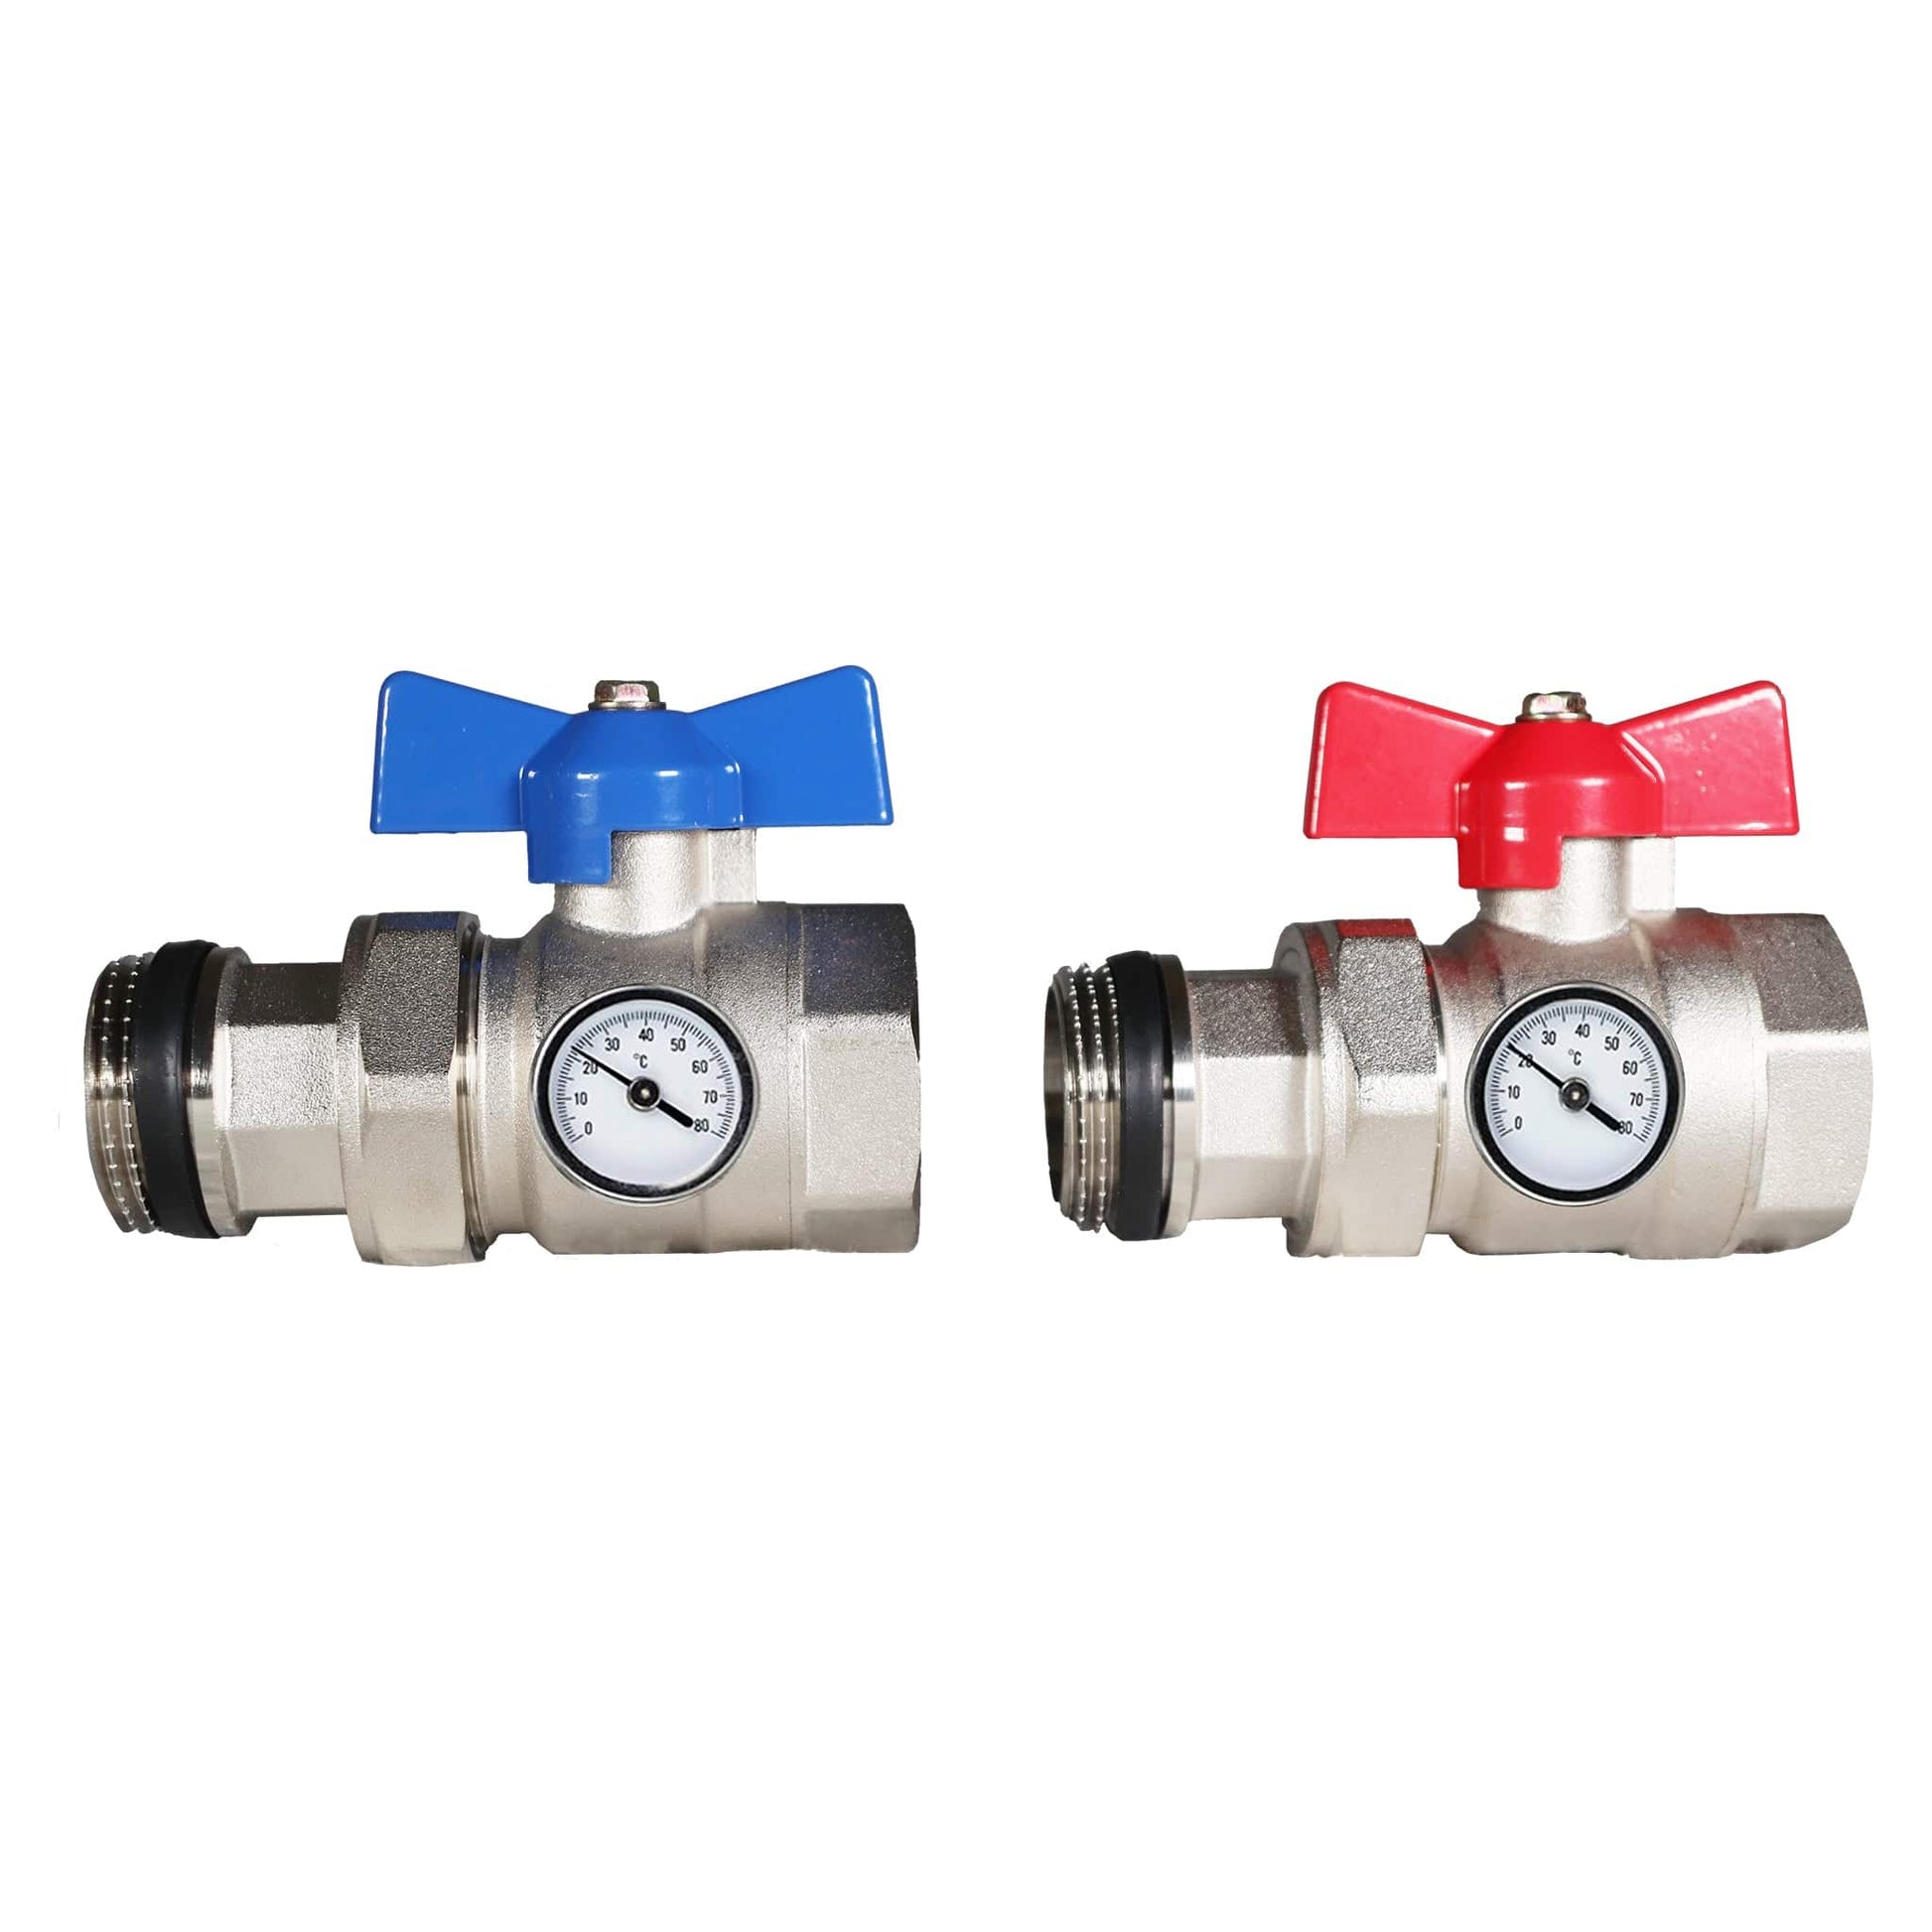 Tio Pair of 1" Isolation Valves With Gauges | TIOVAL0002 BM01785